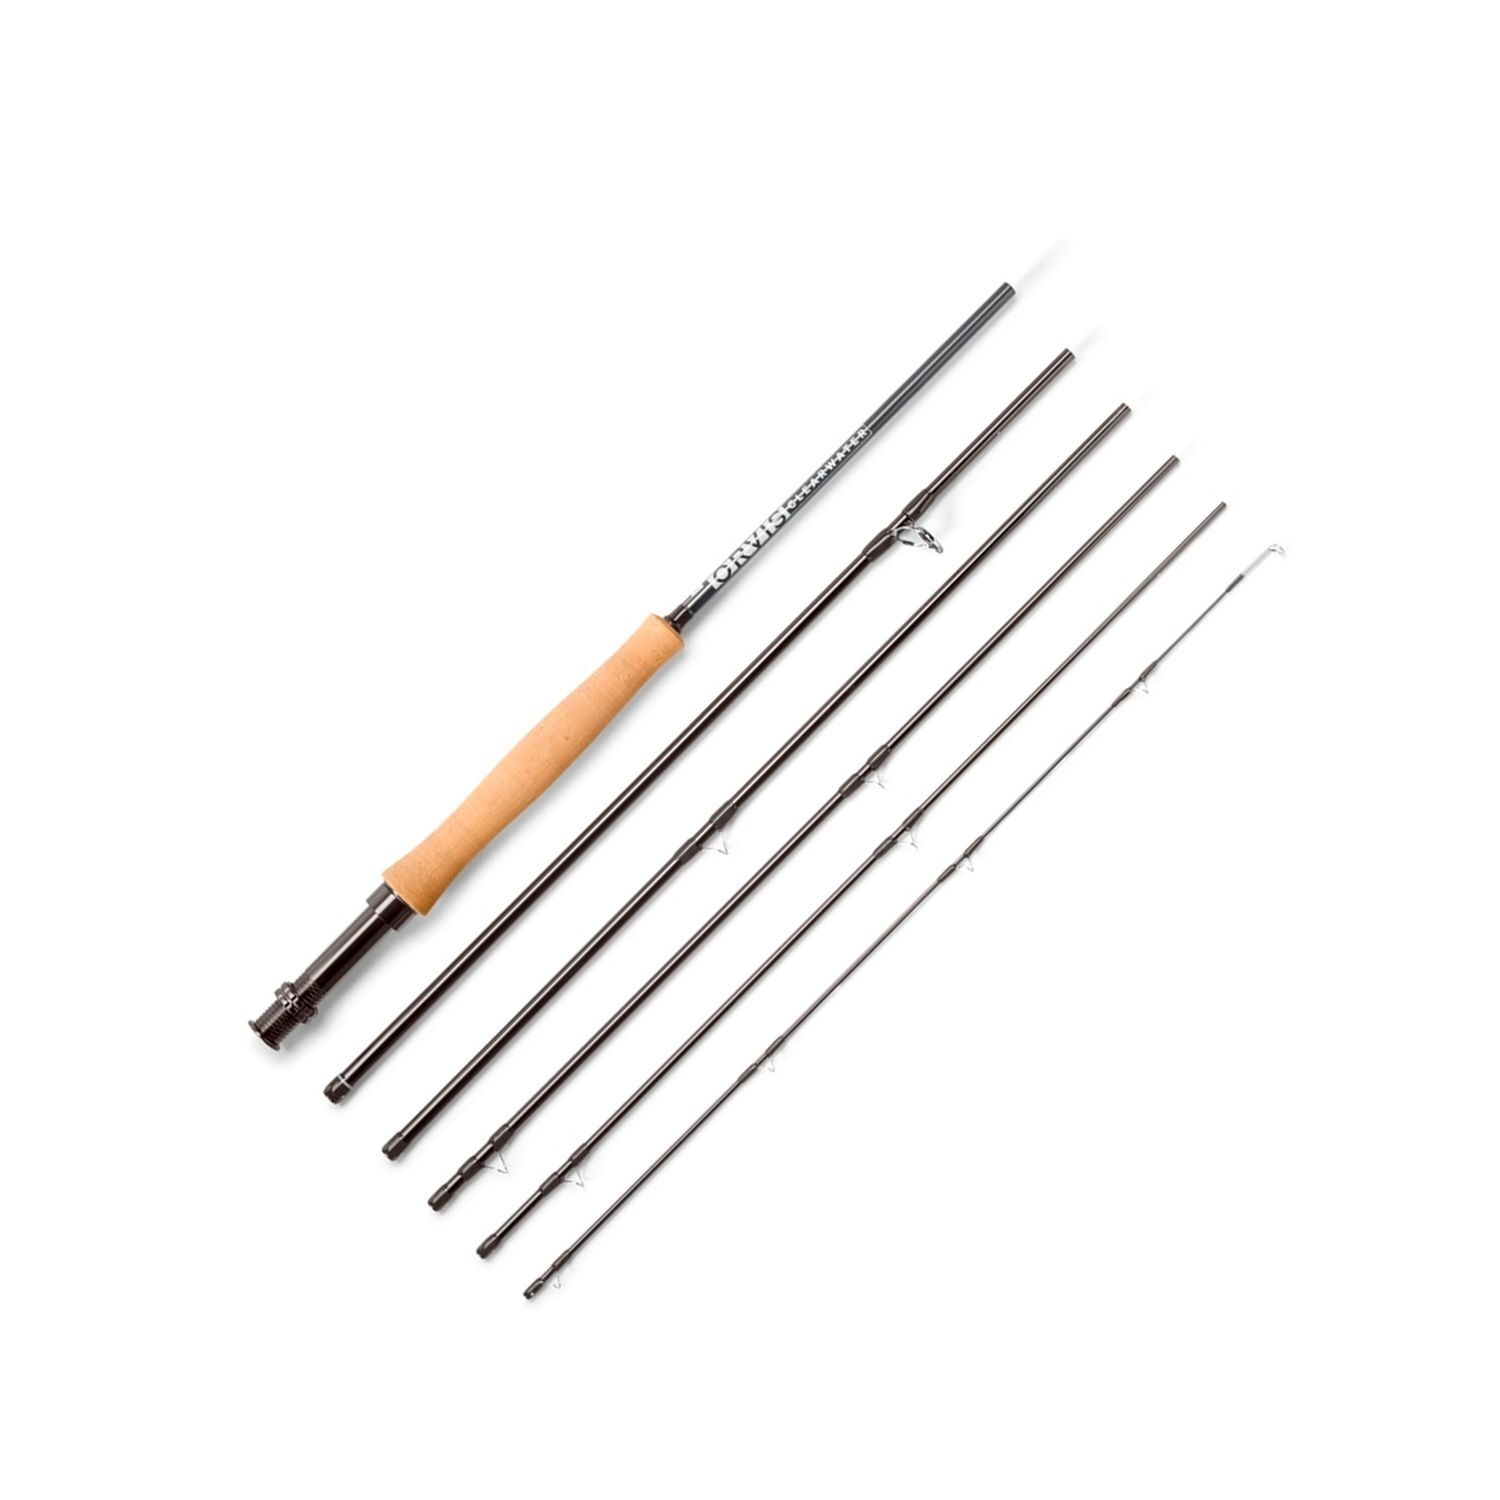 Orvis Clearwater 9ft 6wt Fly Rod (690-6)